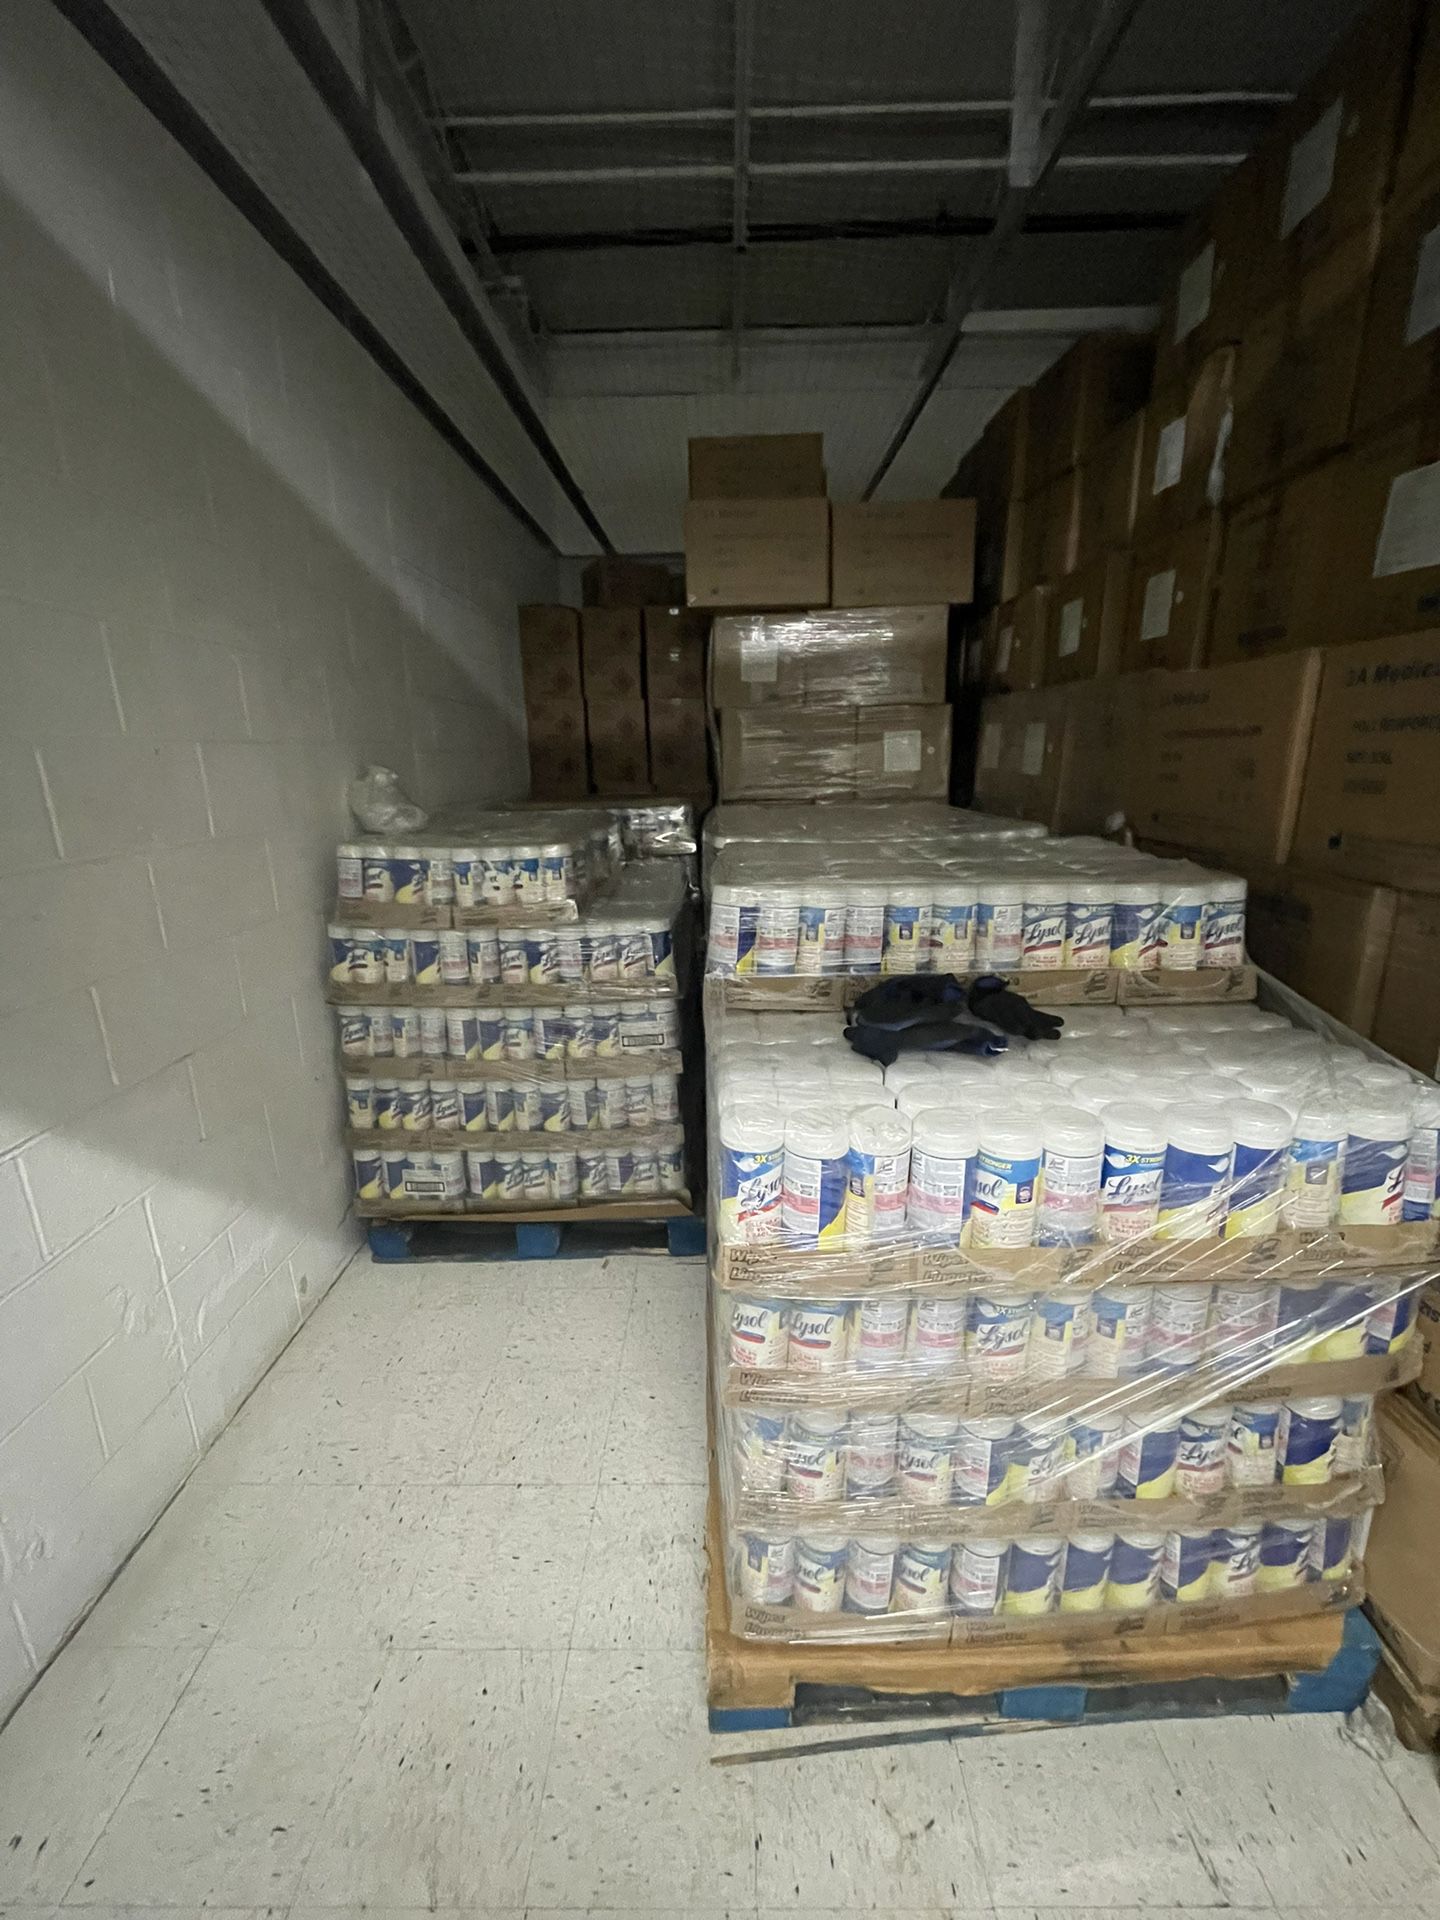 BULK Supply. Lysol Wipes, Disinfectant Wipes, Medical Surgical Gowns, Masks, Face Shields